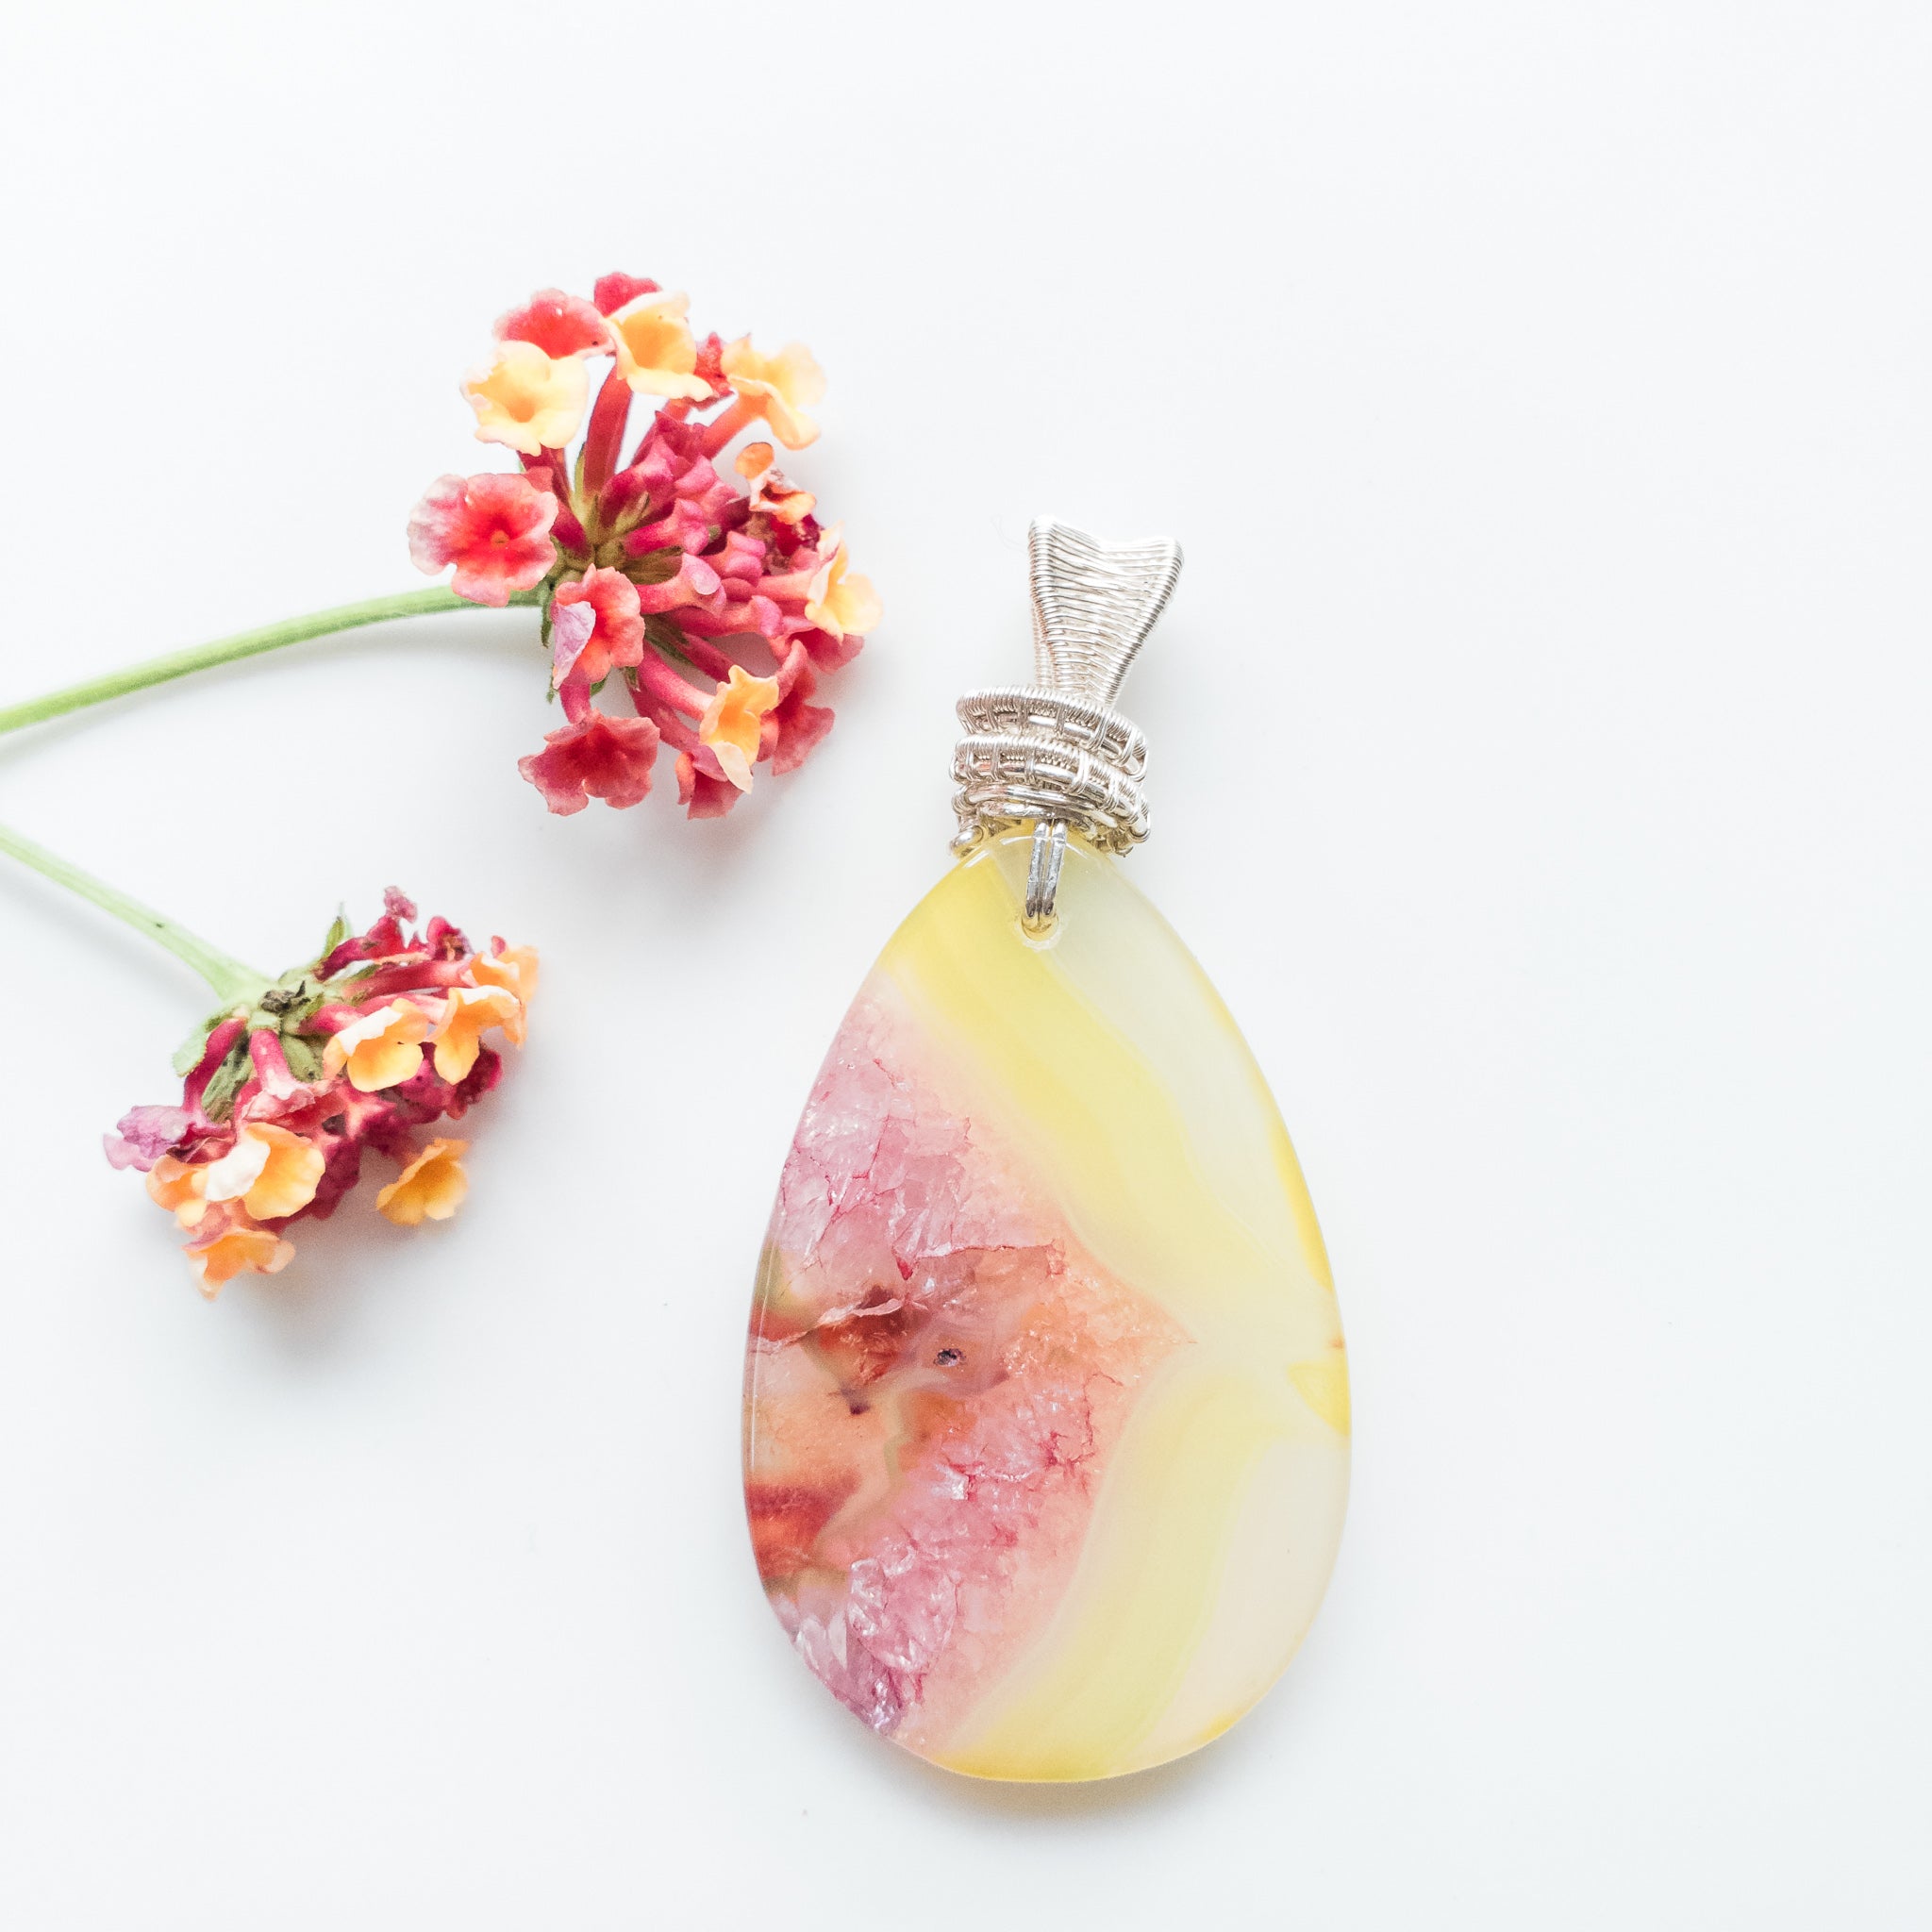 Rio Collection - Vibrant Yellow & Pink Geode Agate Pendant - back side view - BellaChel Jeweler